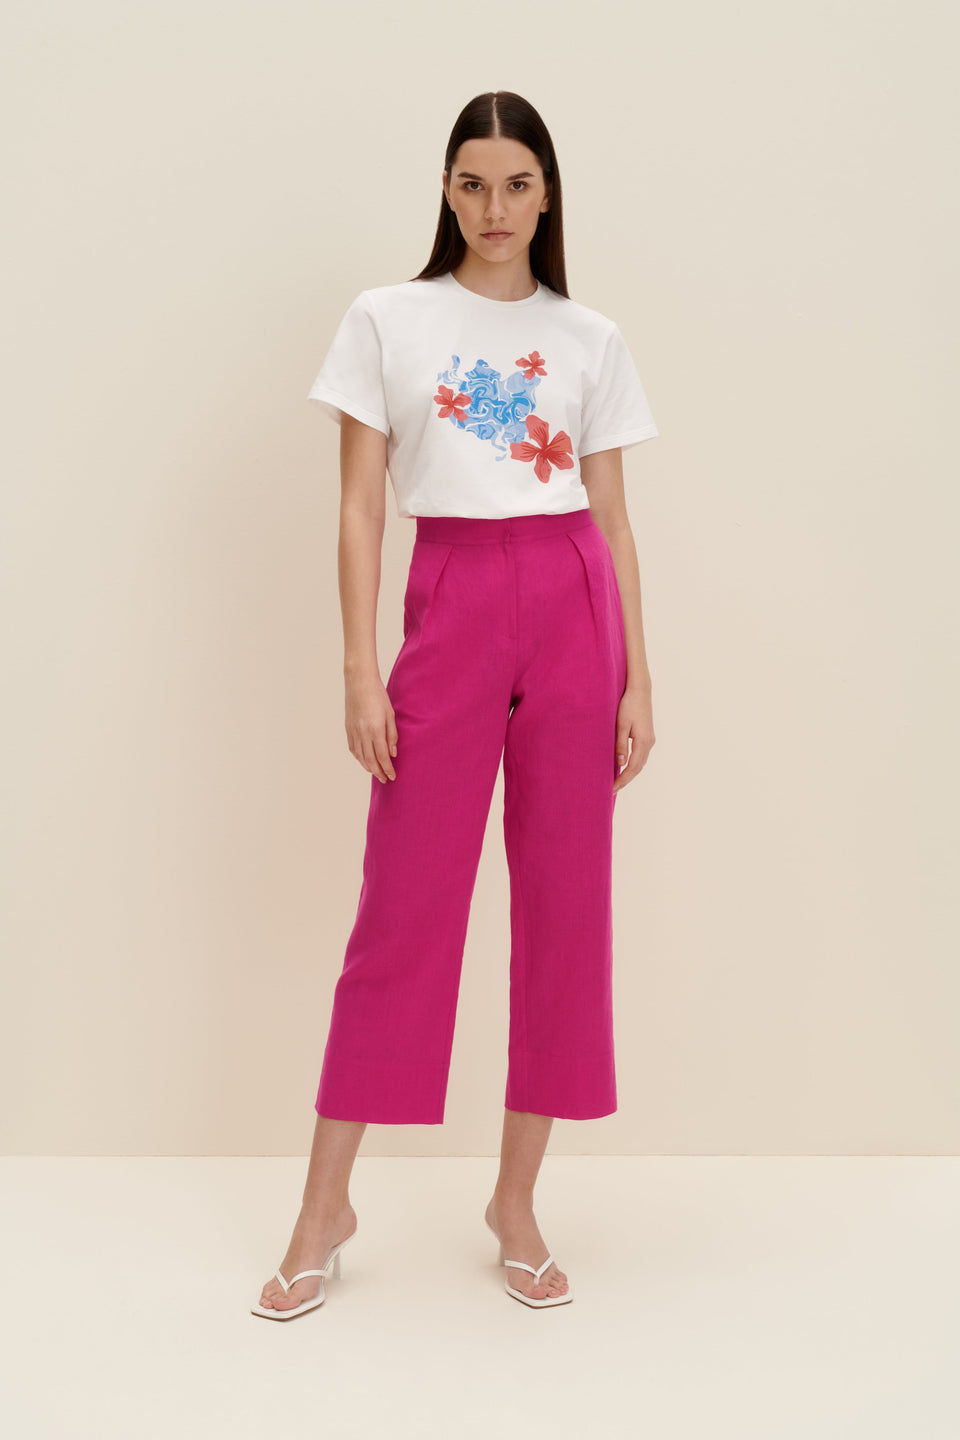 Linen-blend cropped pants in Hot Pink